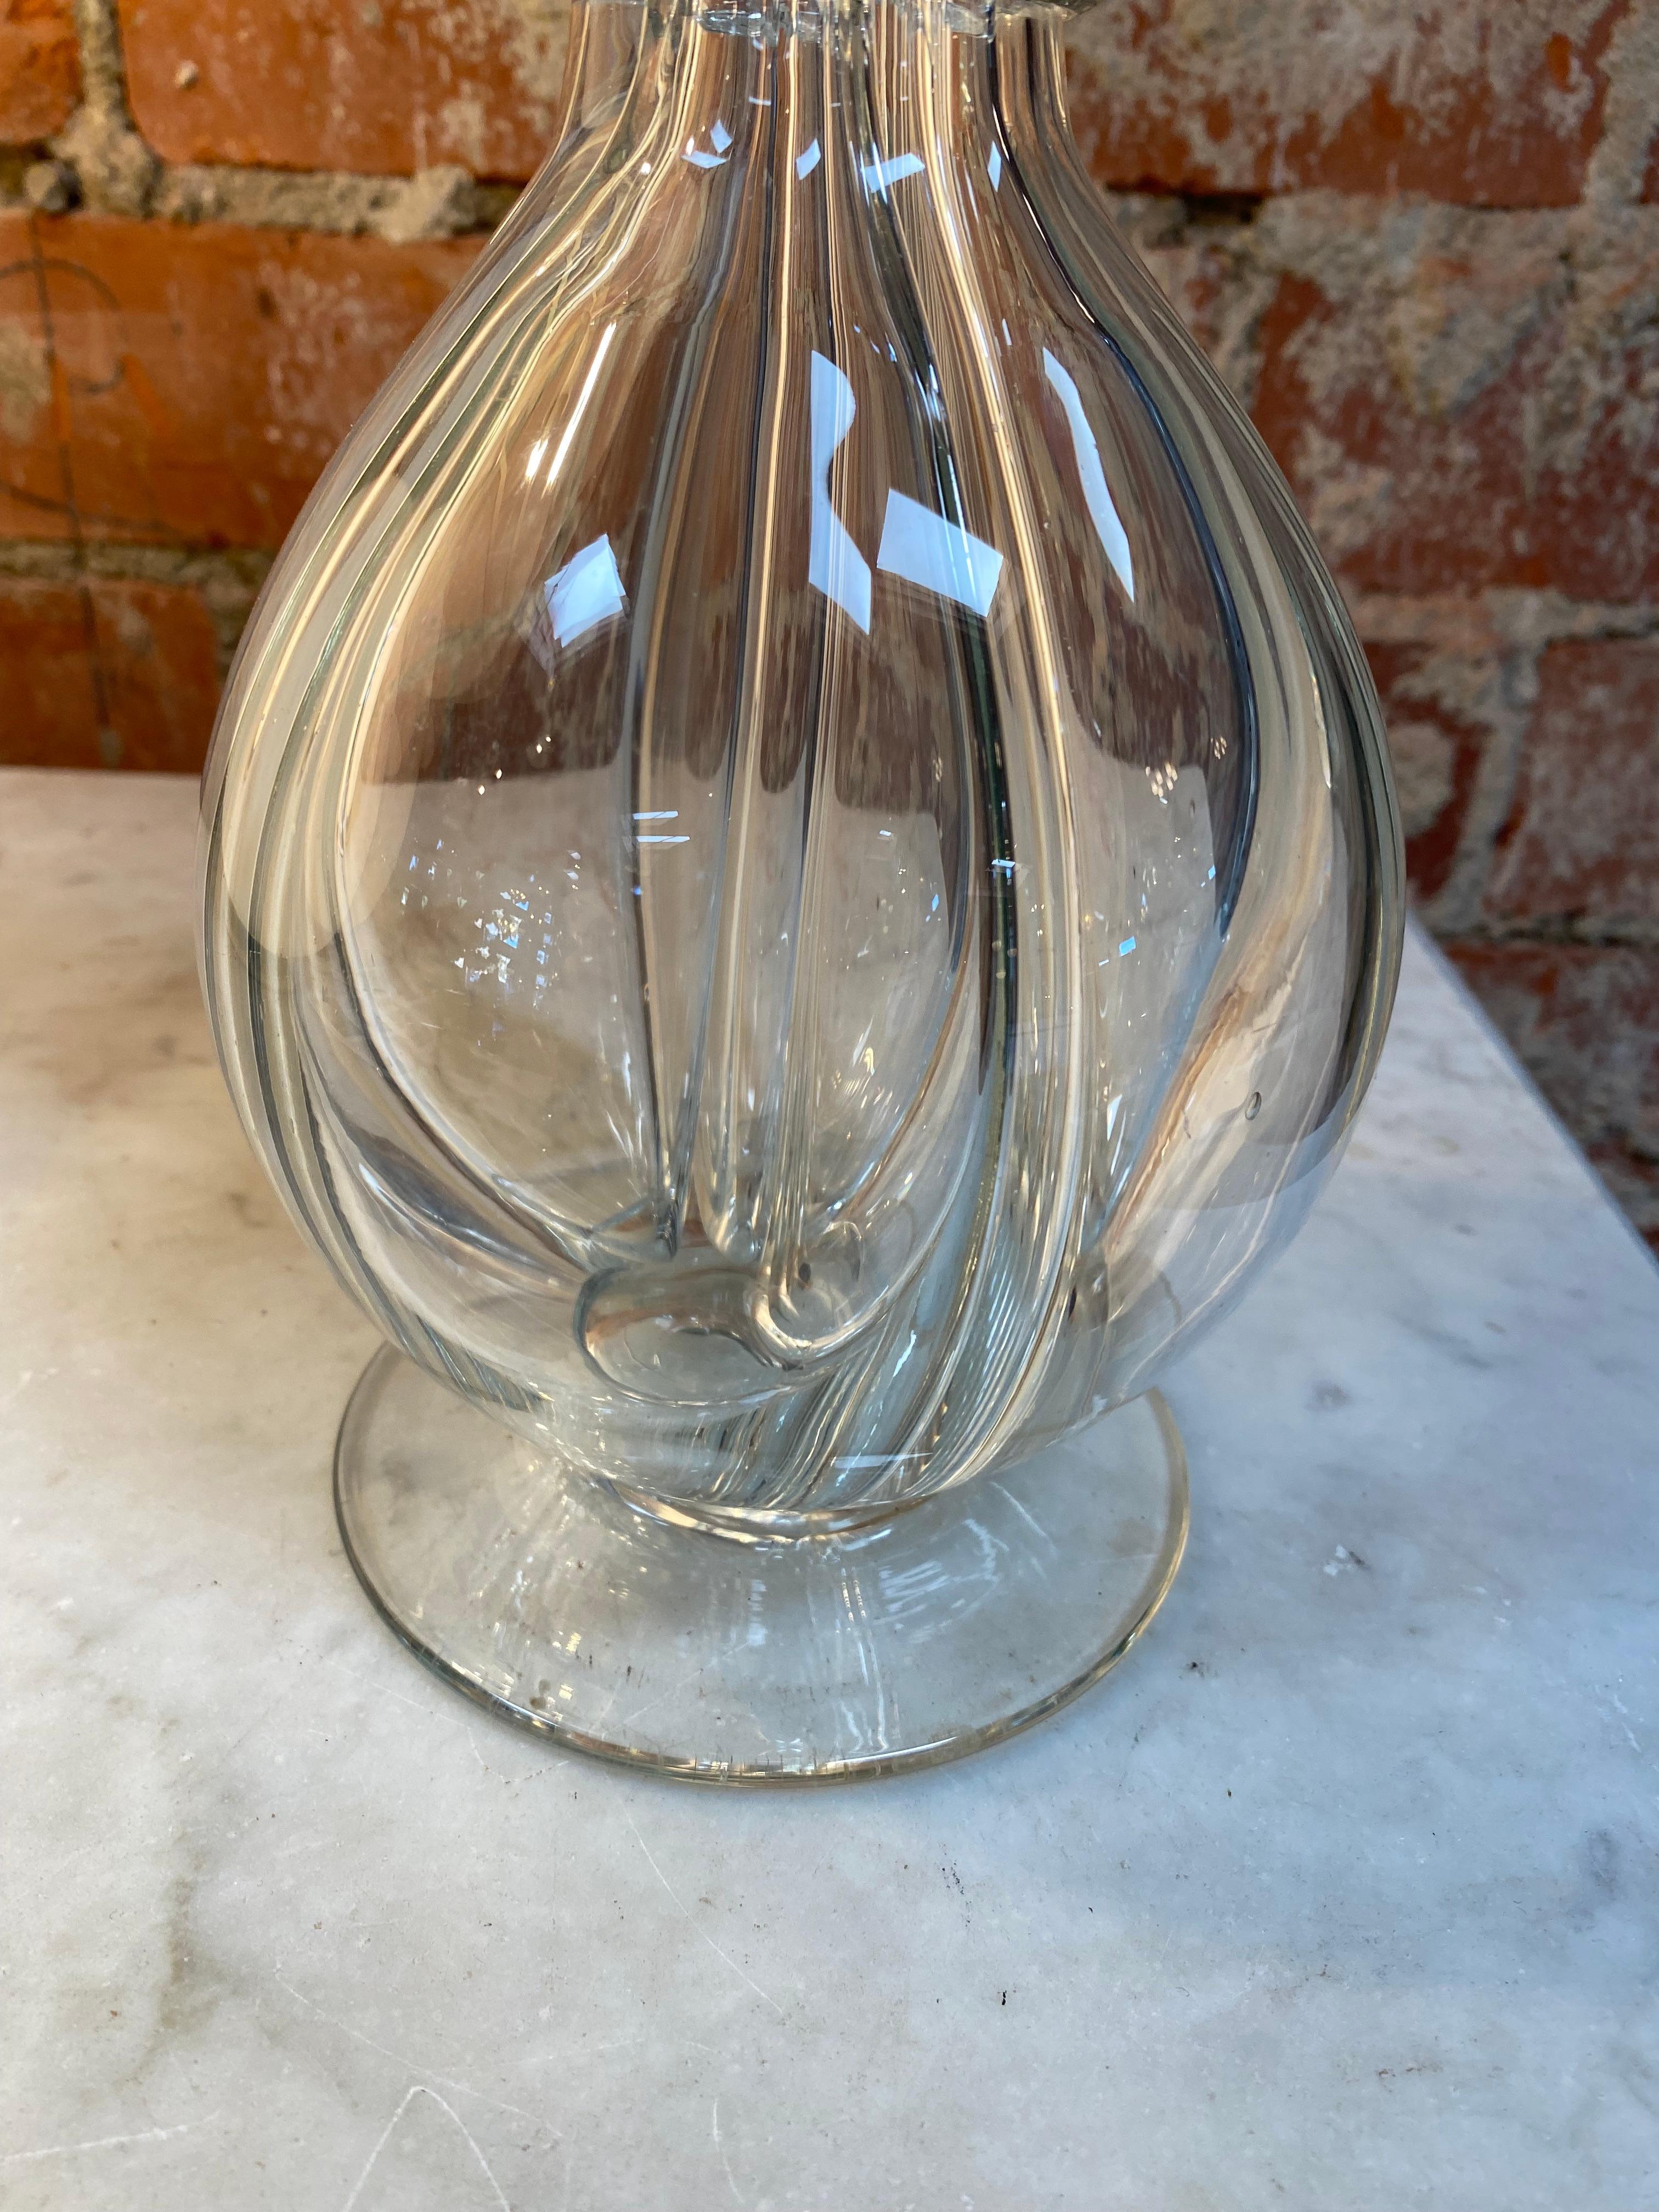 Decorative Italian Decanter Bottle 1950s In Good Condition For Sale In Los Angeles, CA